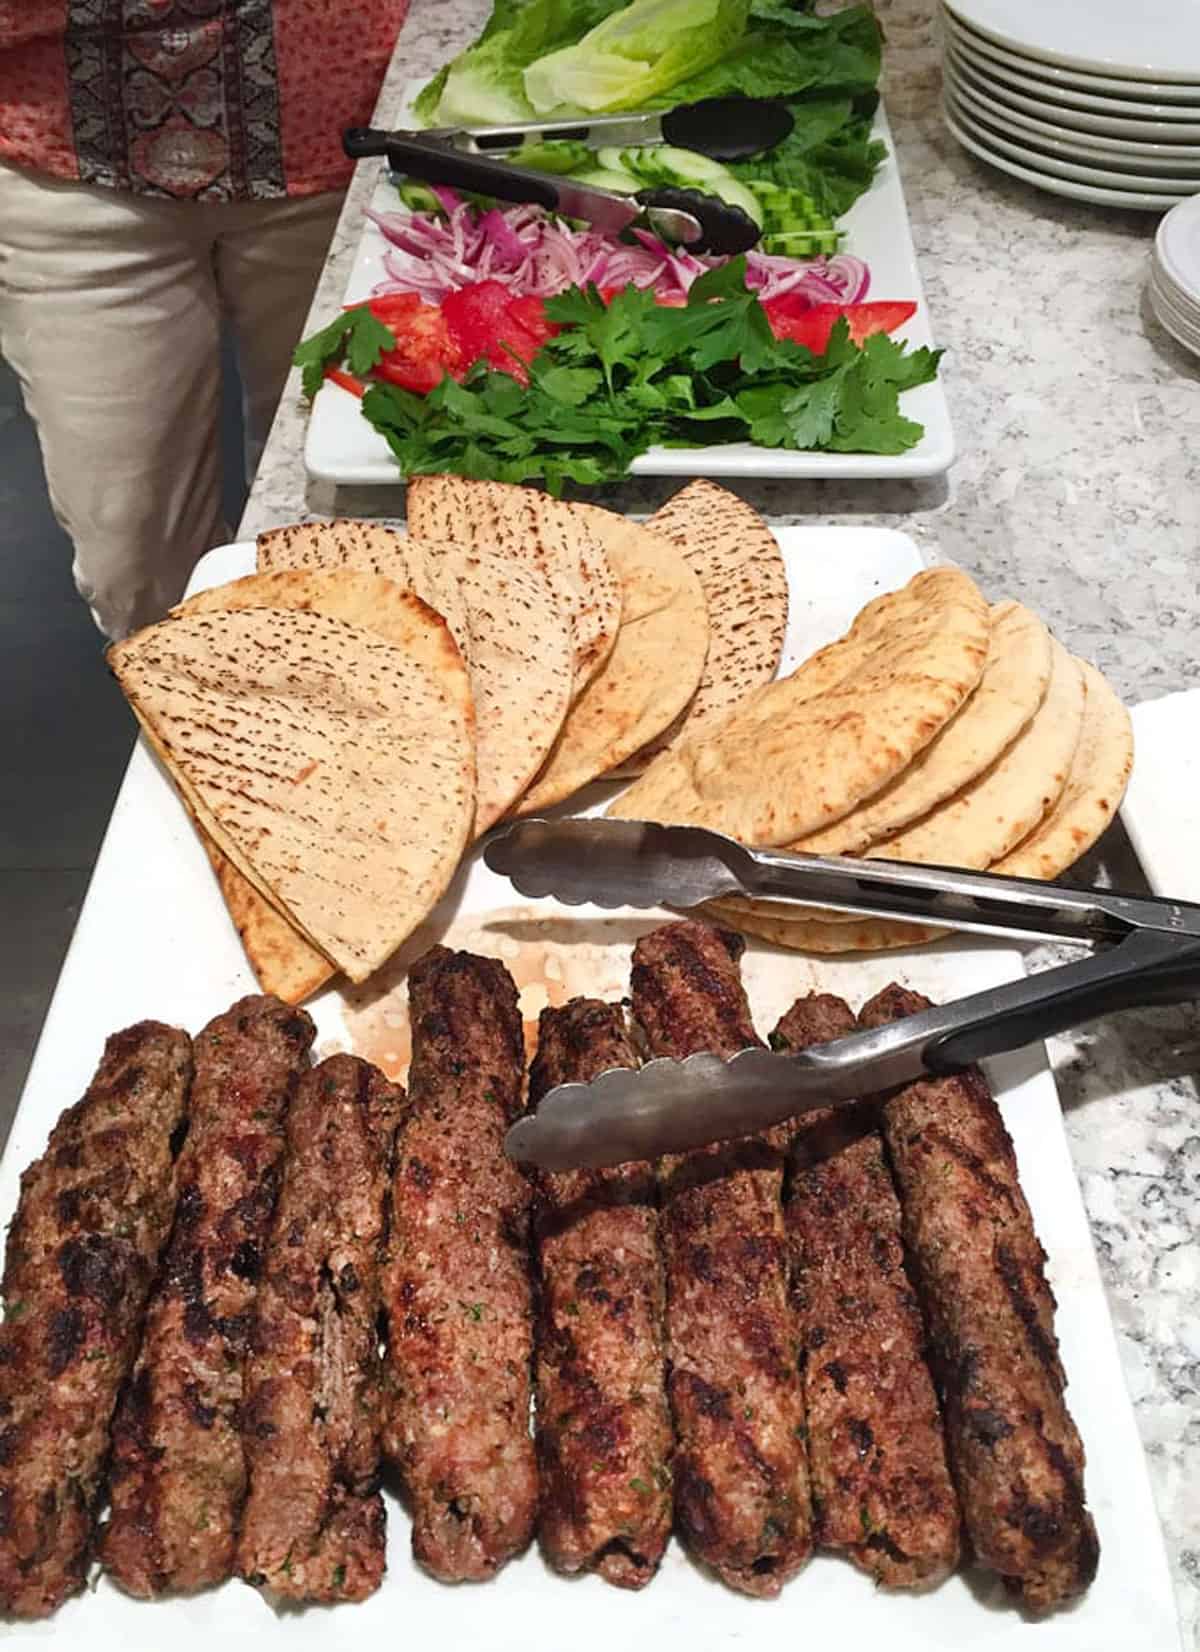 Buffet set up with a platter of 8 lamb kofta kebabs, toasted pitas, lettuce, tomatoes and parsley.